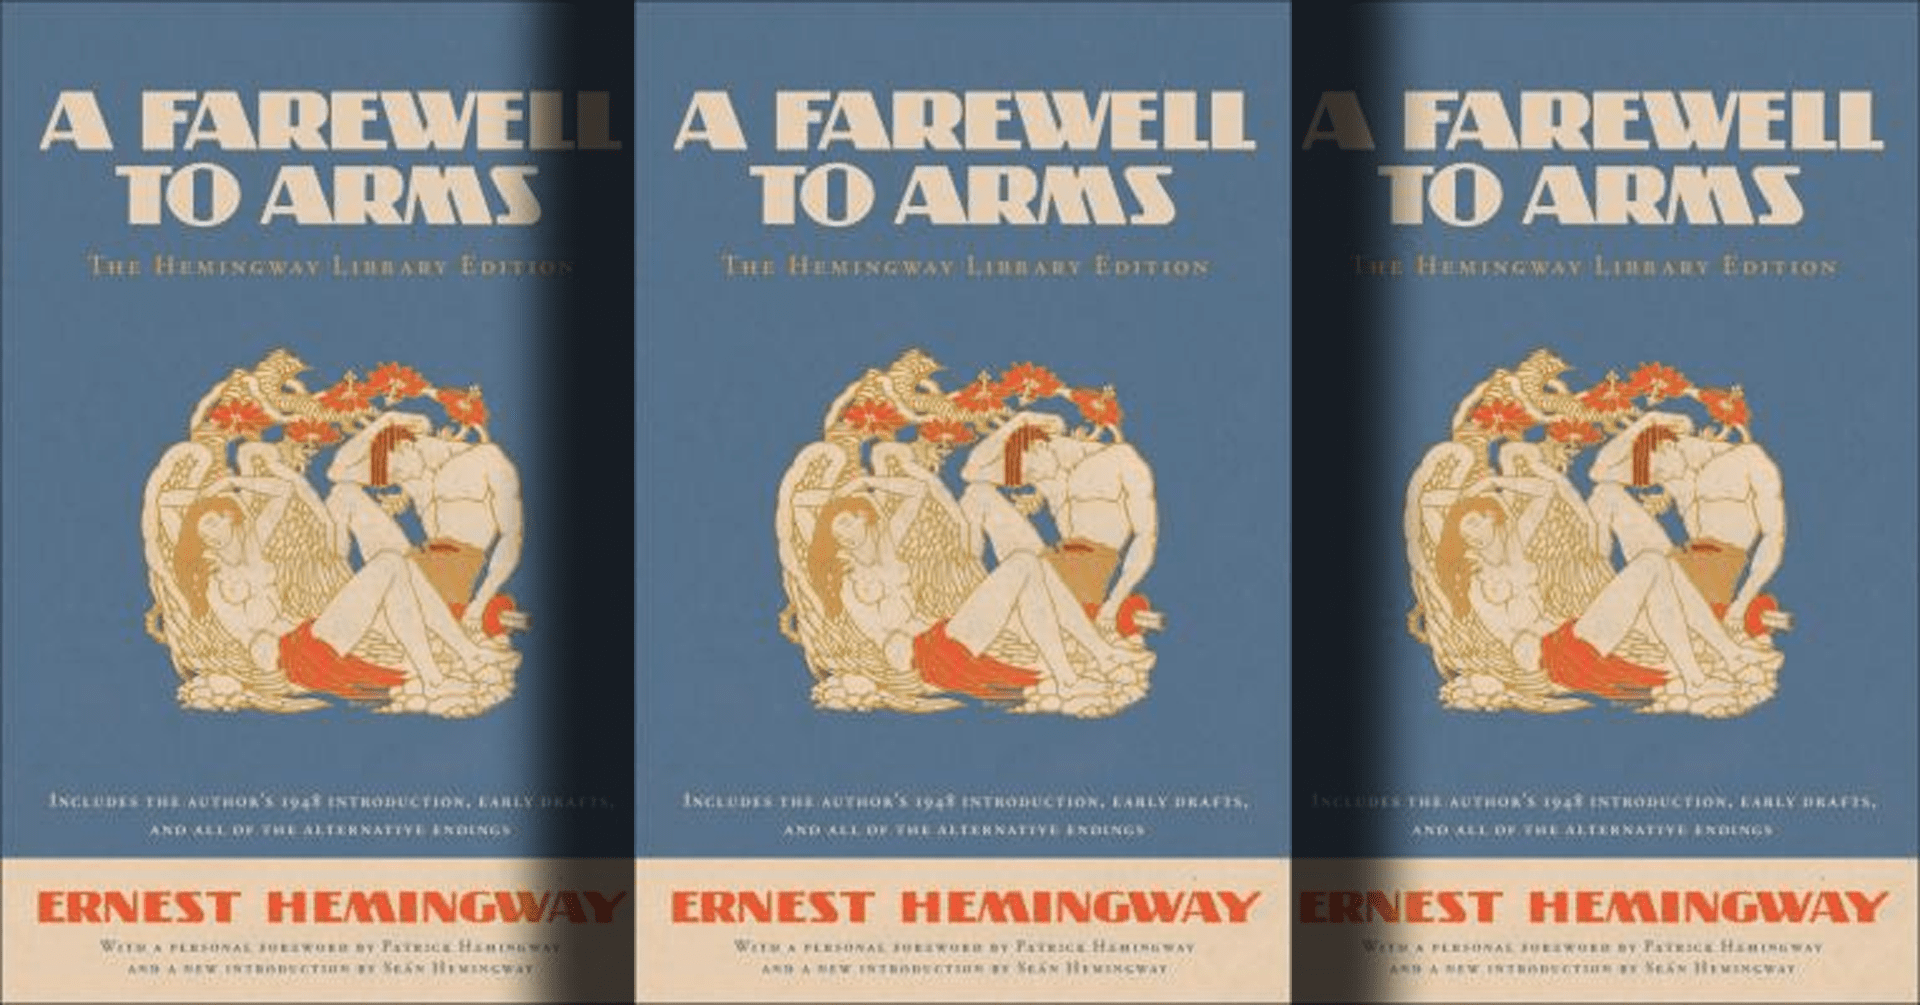 A Farewell to Arms by Ernest Hemingway (book cover)